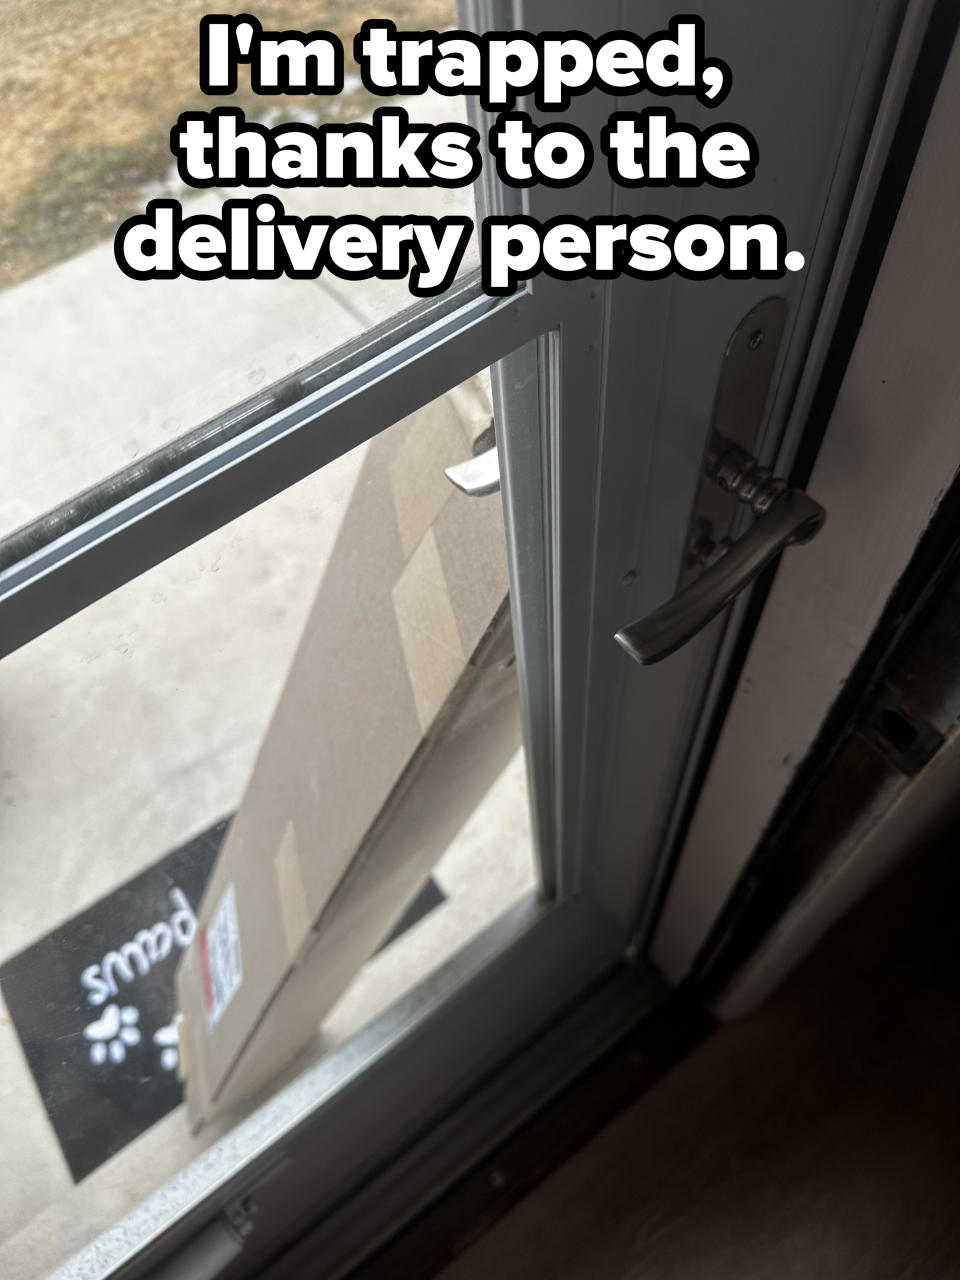 "I'm trapped, thanks to the delivery person": Long, thin package is leaning right up against the outside of the front door knob